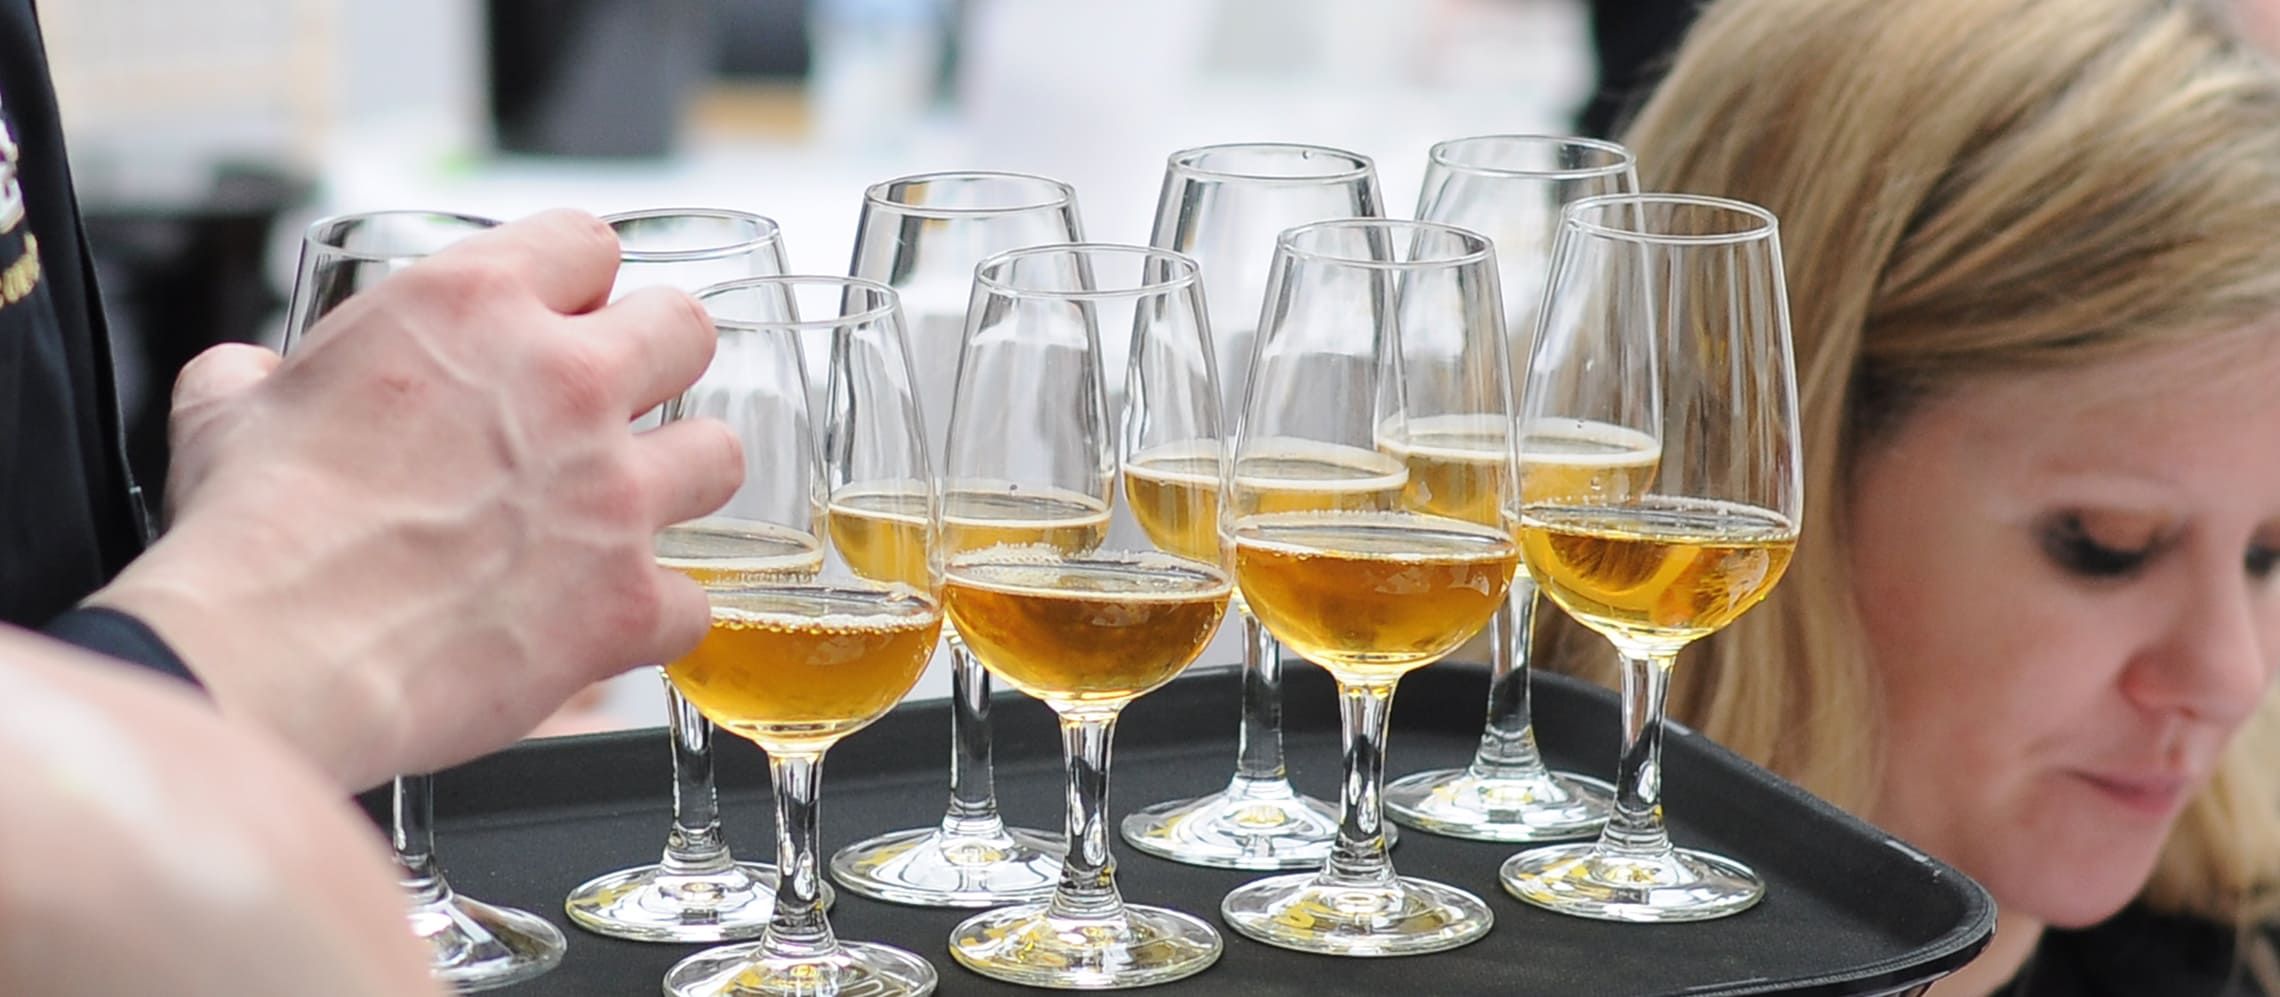 Photo for: London Wine, Beer, and Spirits Competitions Launch Top 100 Lists